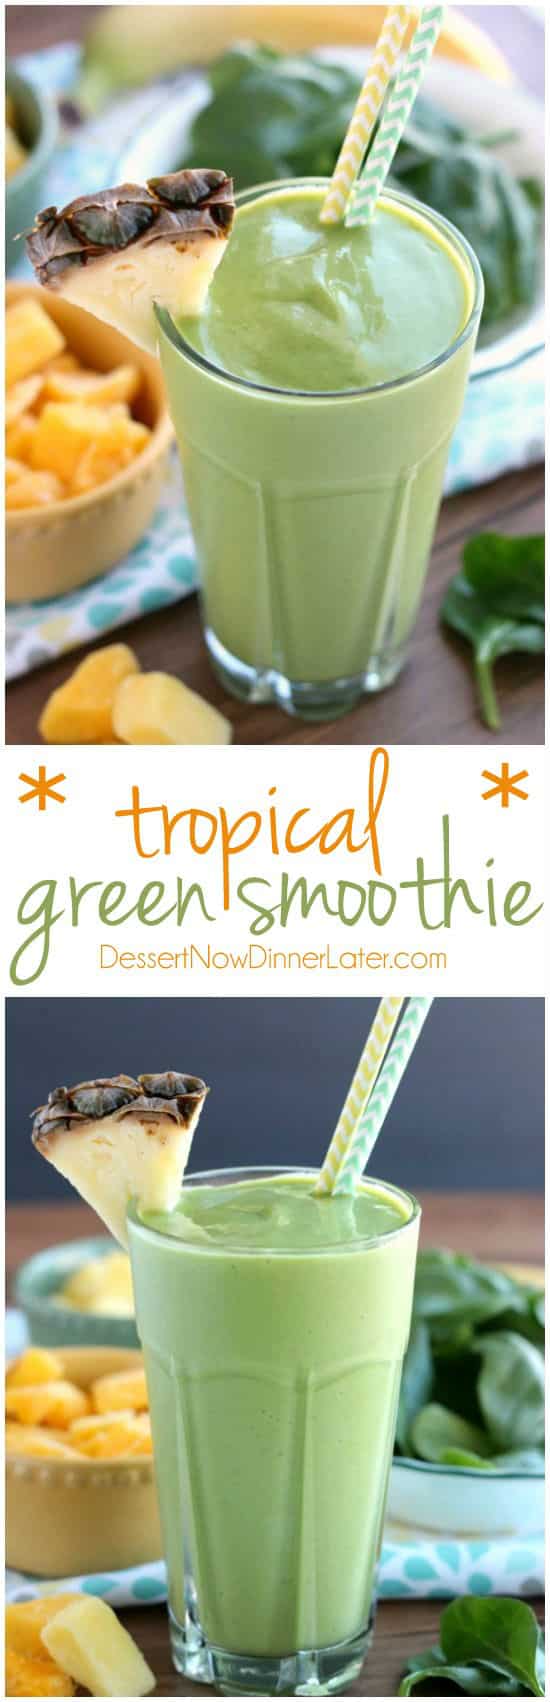 This Tropical Green Smoothie uses tender spinach leaves, plain non-fat greek yogurt, and frozen fruit for a naturally sweet smoothie that's great for breakfast or a snack!